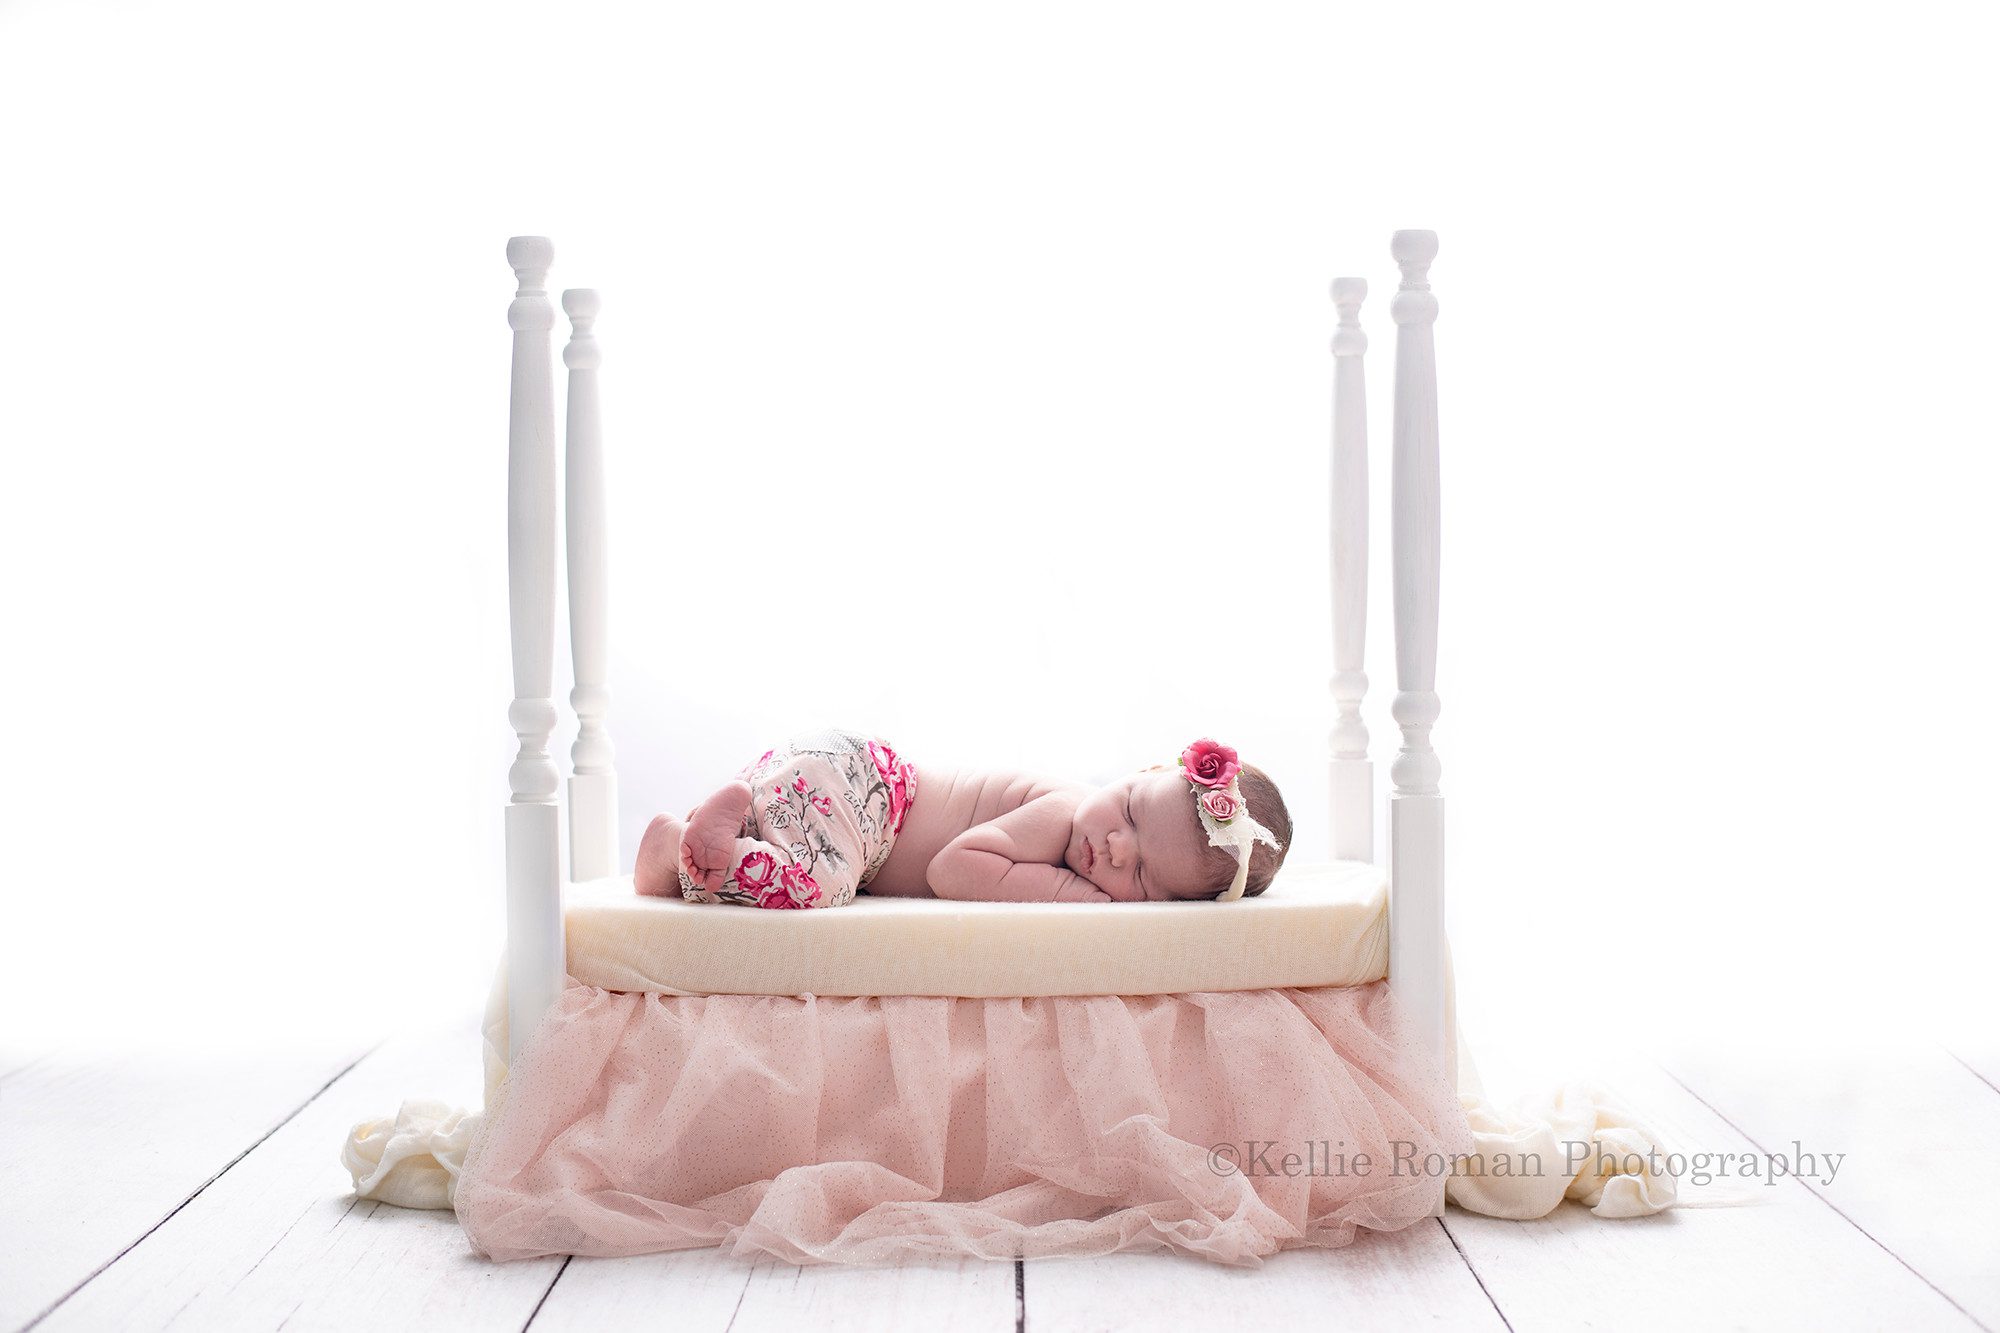 baby photos a newborn baby girl laying on her belly onto of a white wood bed with 4 tall bed posts the baby has floral pink pants on and a pink floral headband the bed has a light pink bedskirt and a fabric covering it there is backlighting so the image is very bright and white